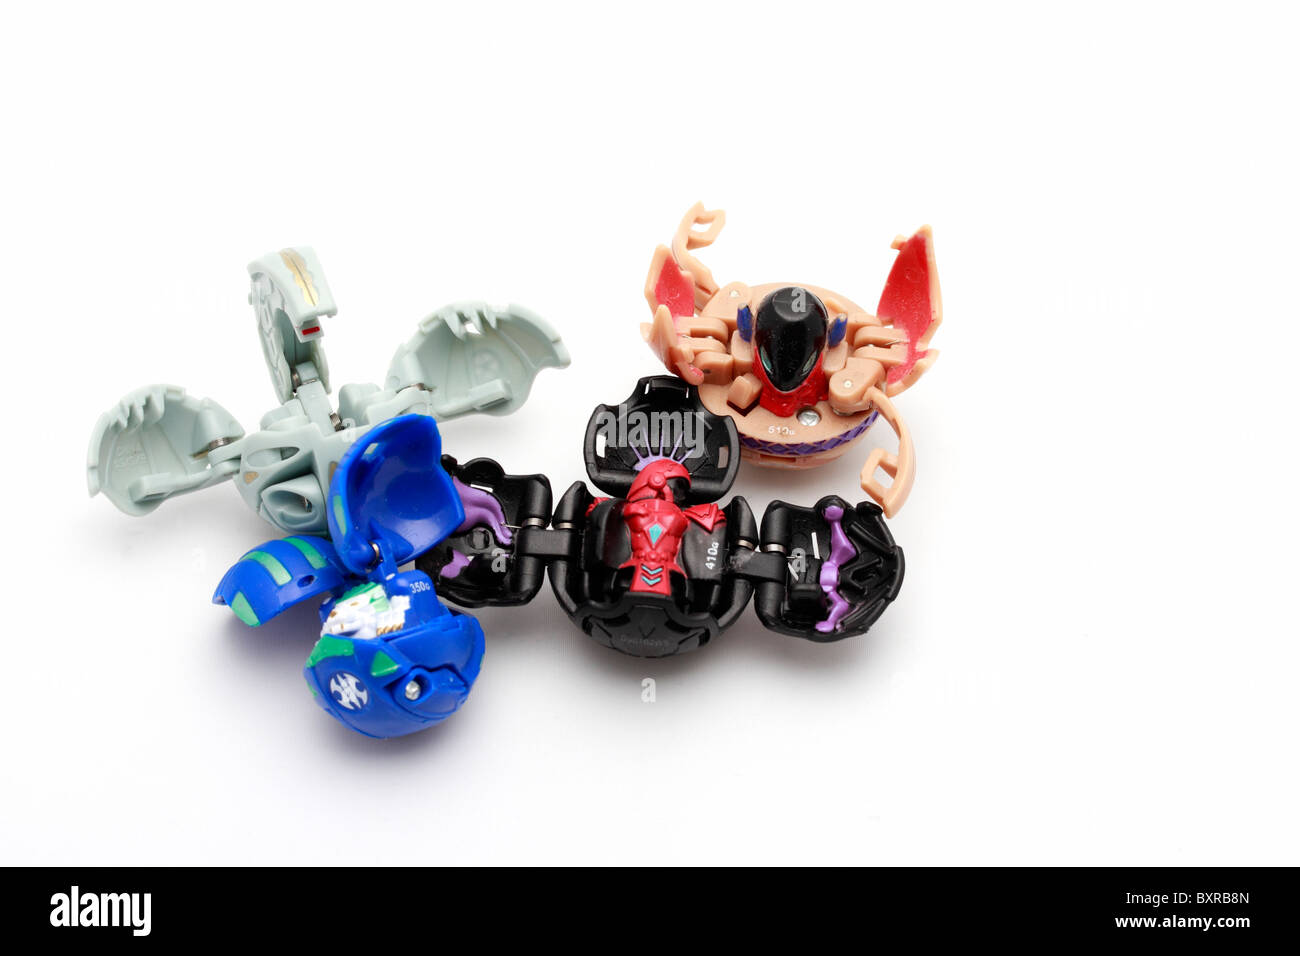 Four Bakugan from the Japanese baku to explode' and 'Gan' meaning Photo - Alamy